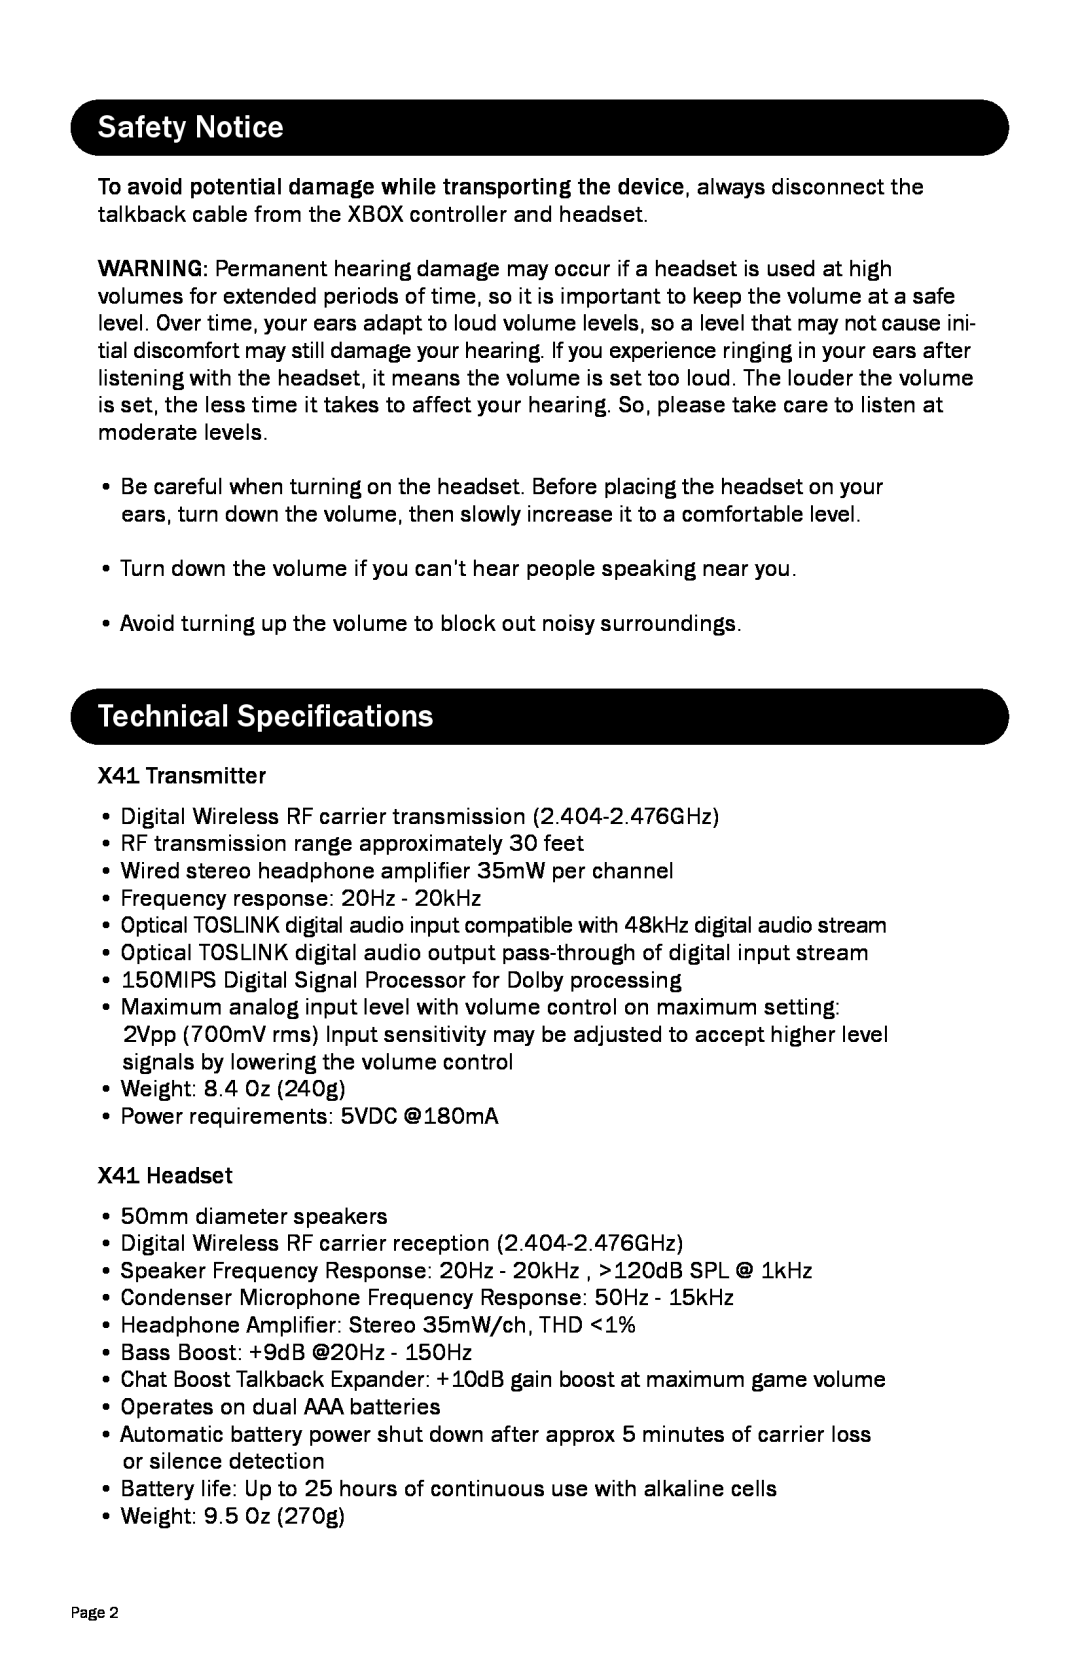 Turtle Beach TBS2170 warranty Safety Notice, Technical Specifications 